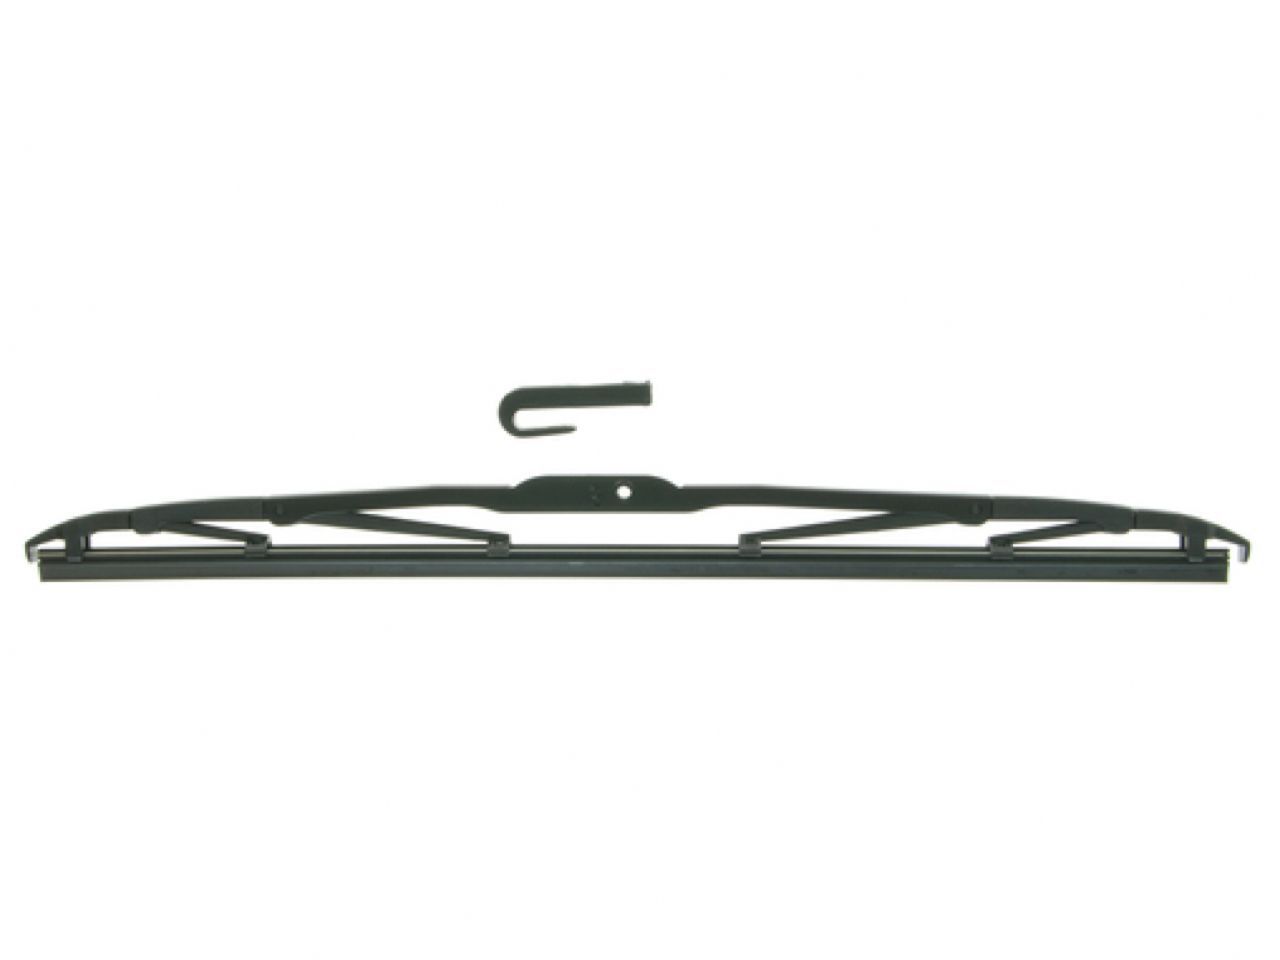 Anco Windshield Wipers 31-16 Item Image